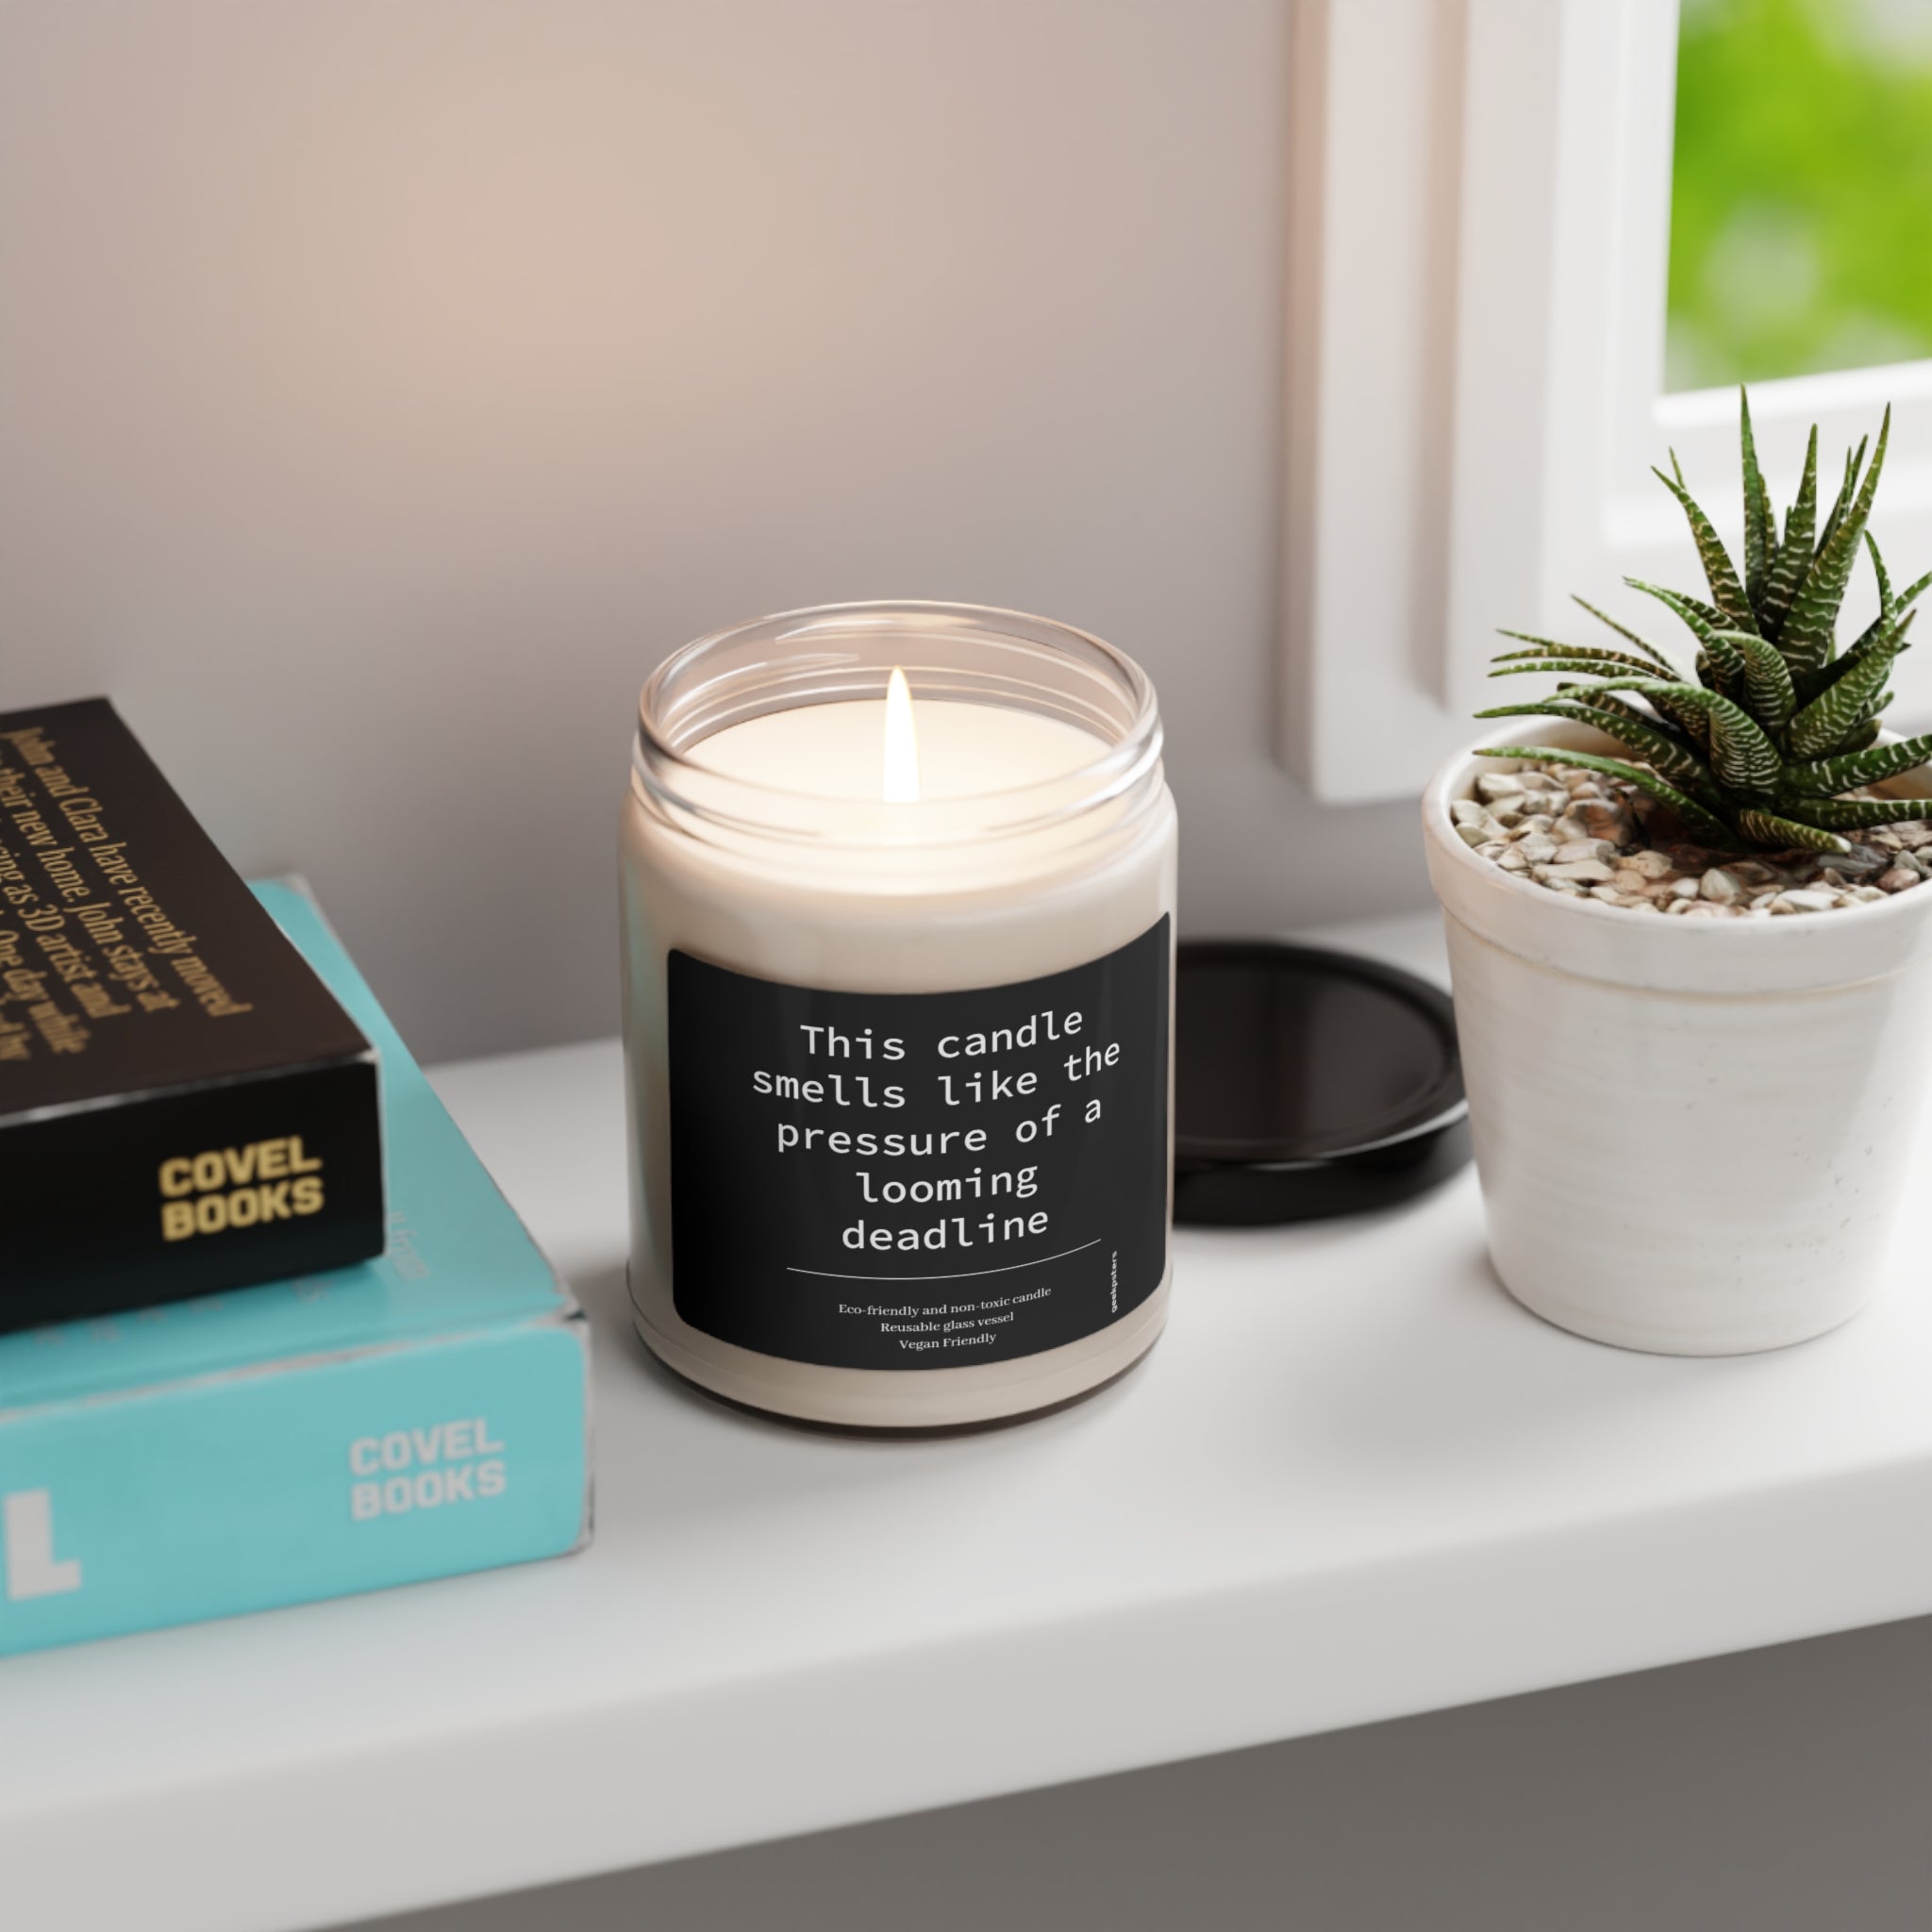 A "This Candle Smells Like the Pressure of a Looming Deadline" scented soy candle, 9oz with a humorous label next to books and a potted succulent on a windowsill.